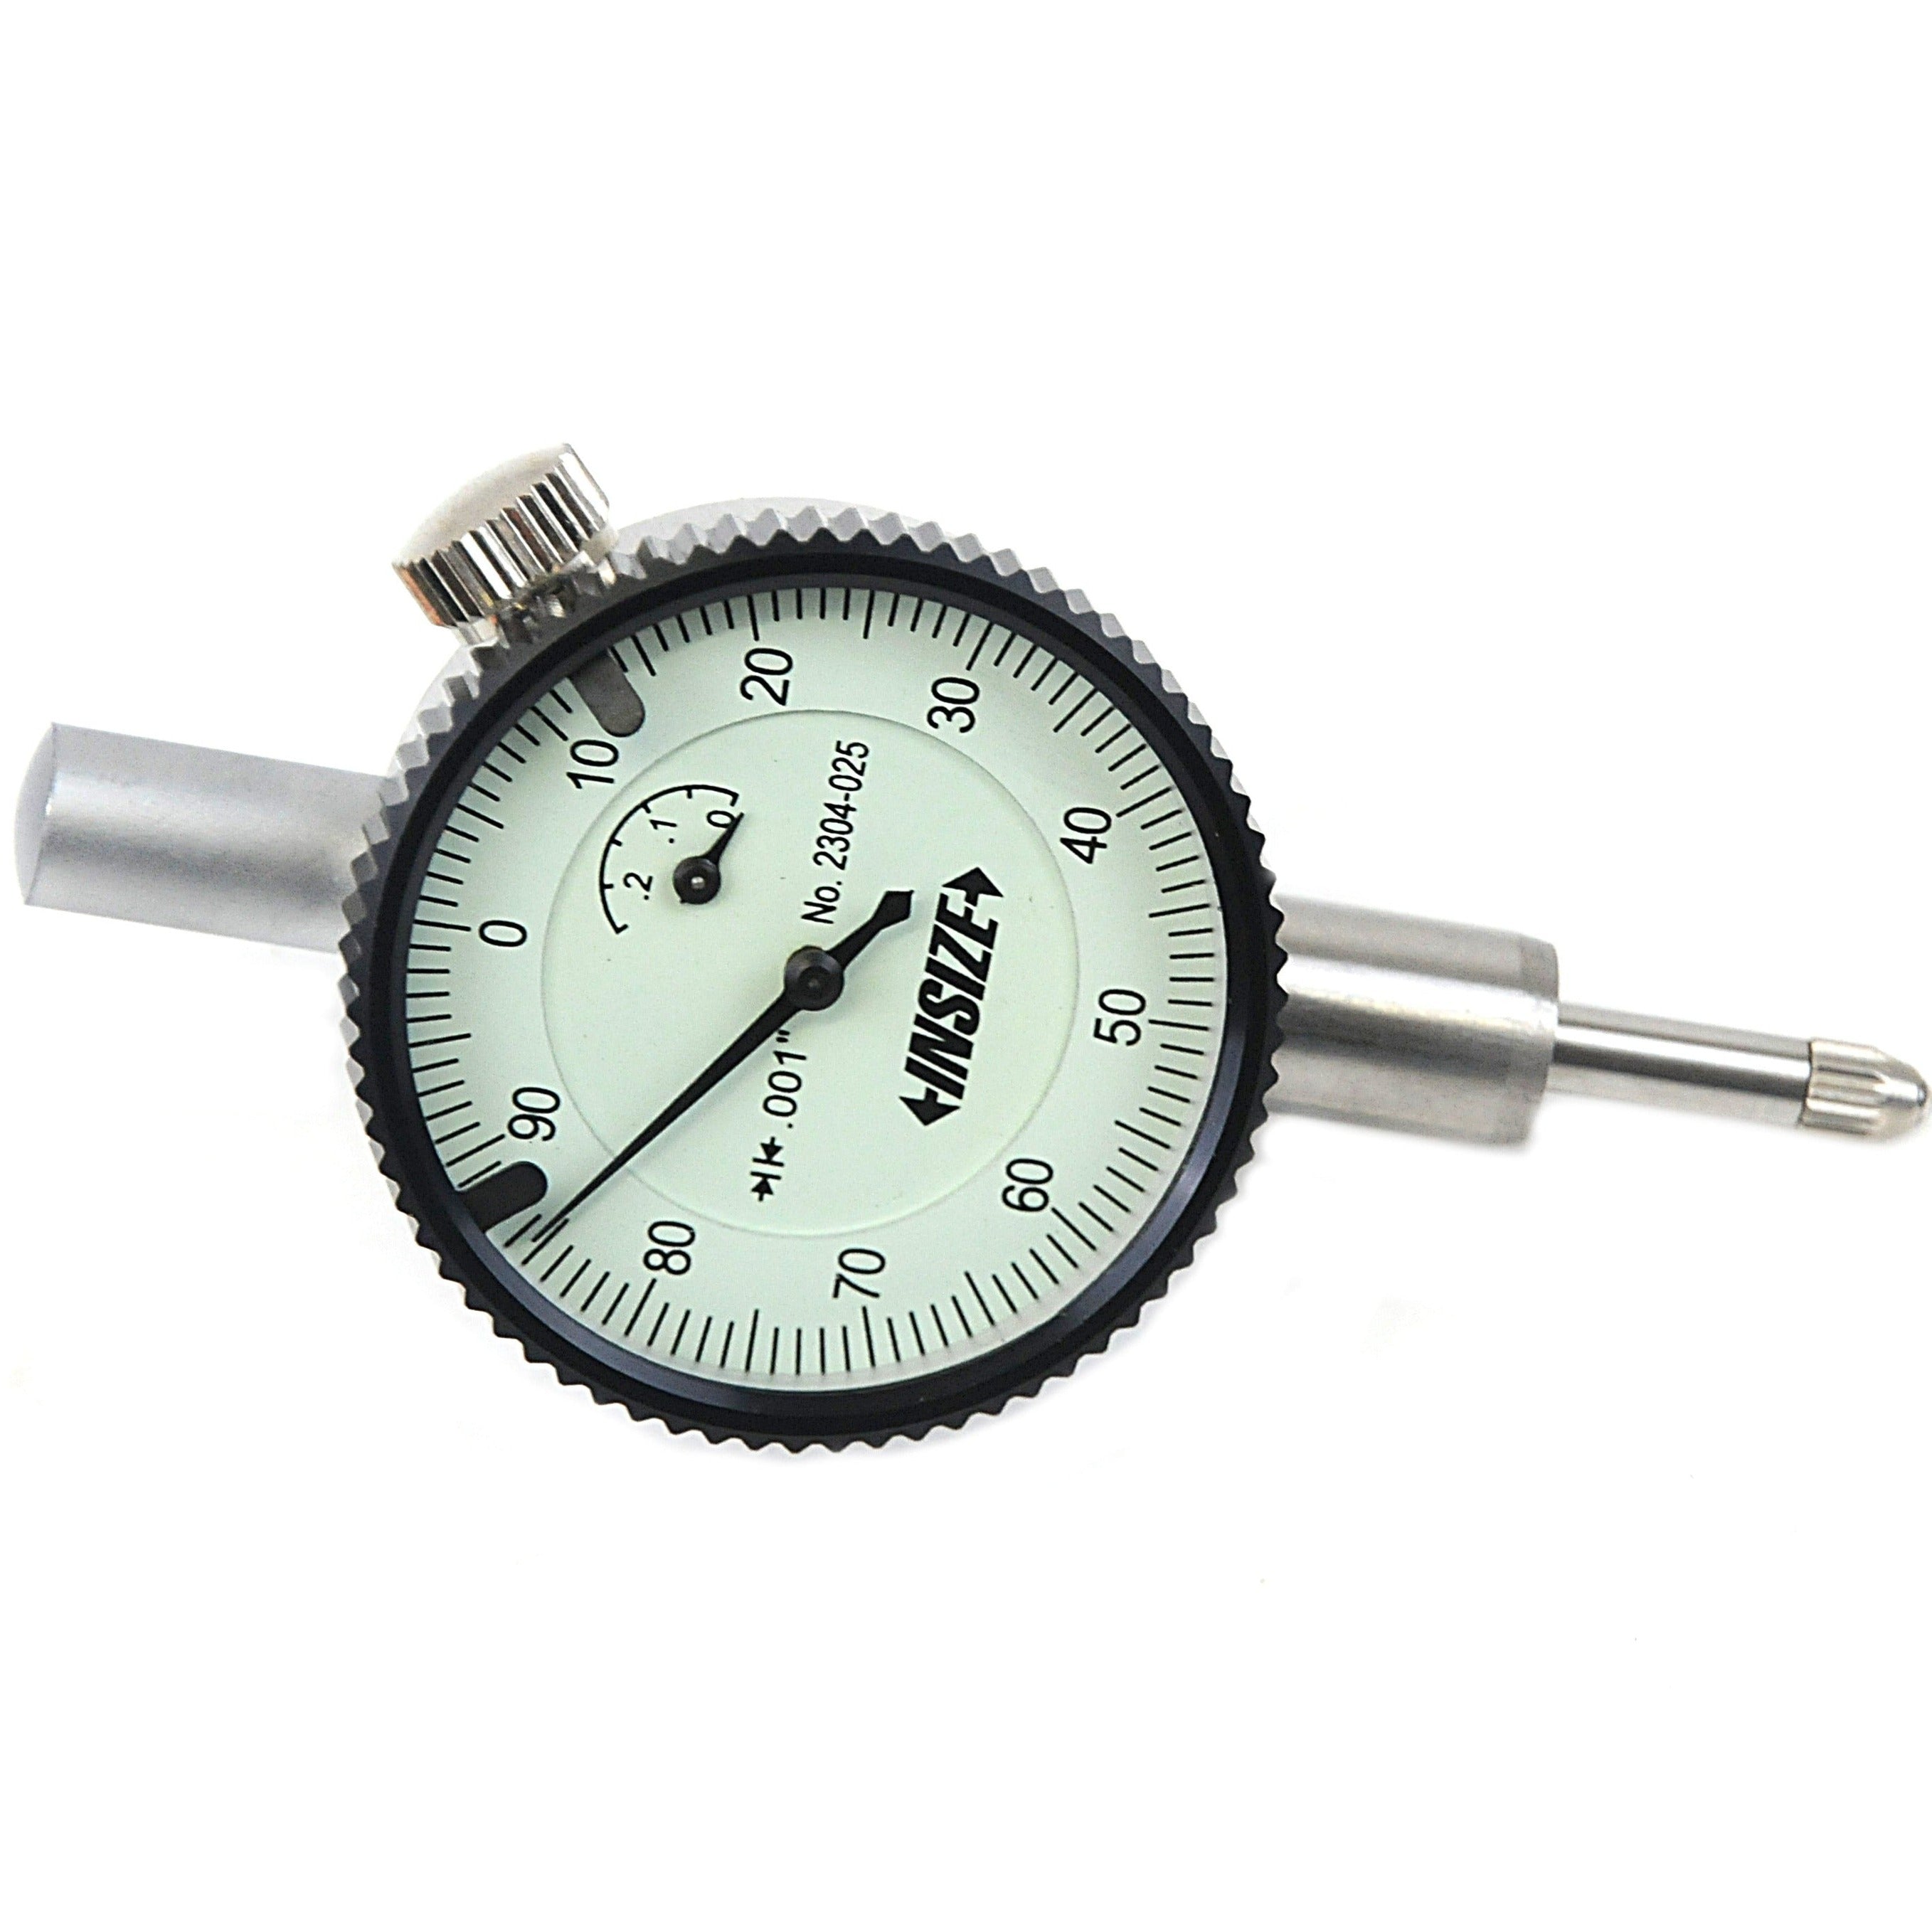 Insize Imperial Compact Dial Indicator 0.25" 2304-025